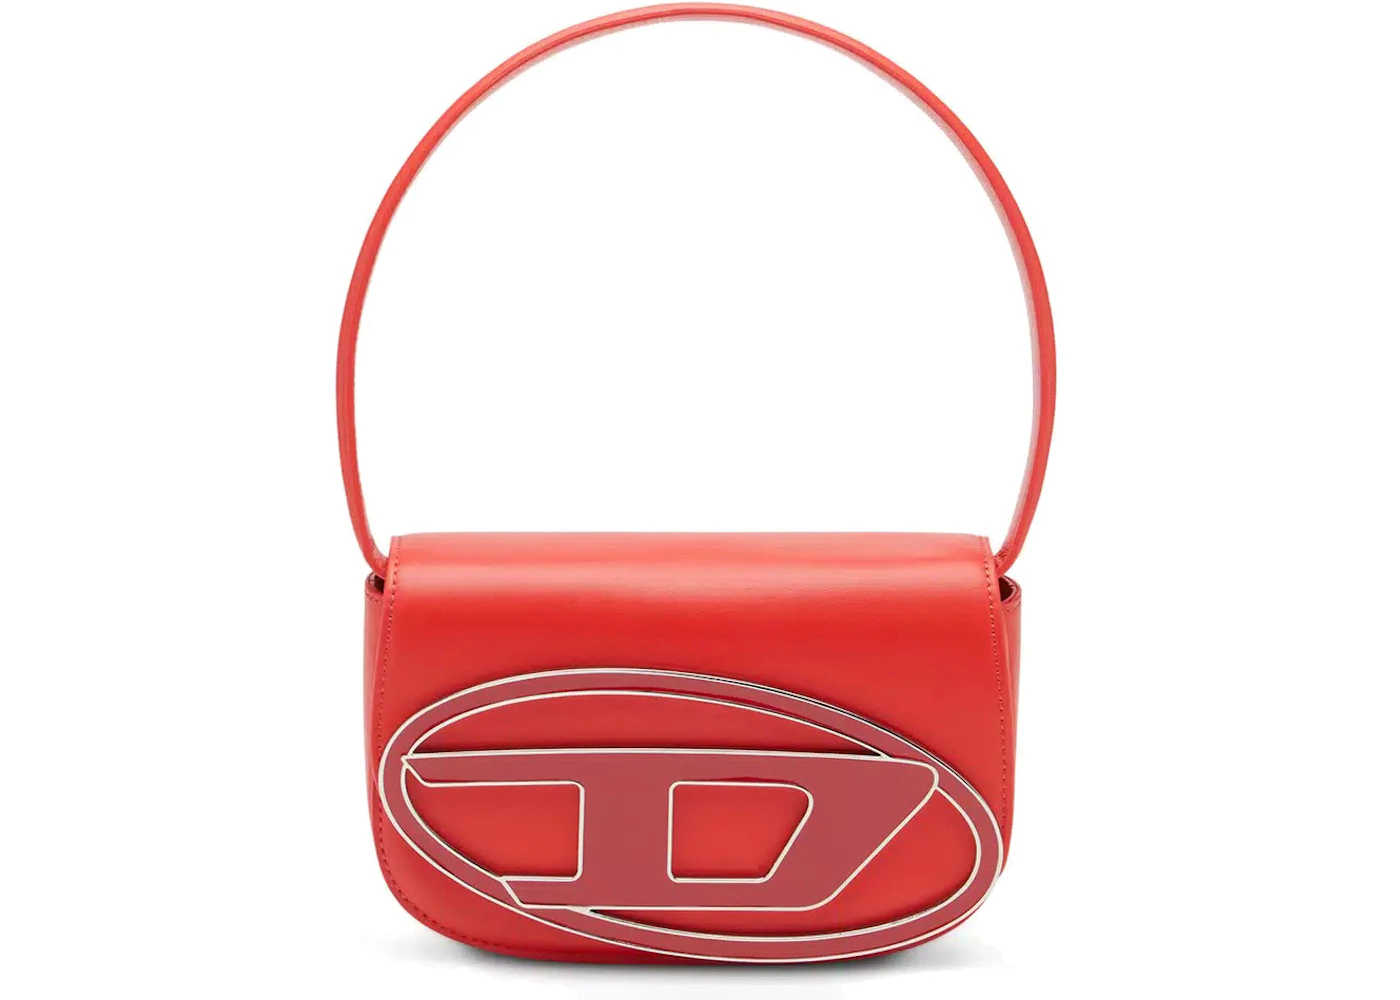 Diesel 1DR Shoulder Bag Nappa Leather Red in Nappa Leather with Silver ...